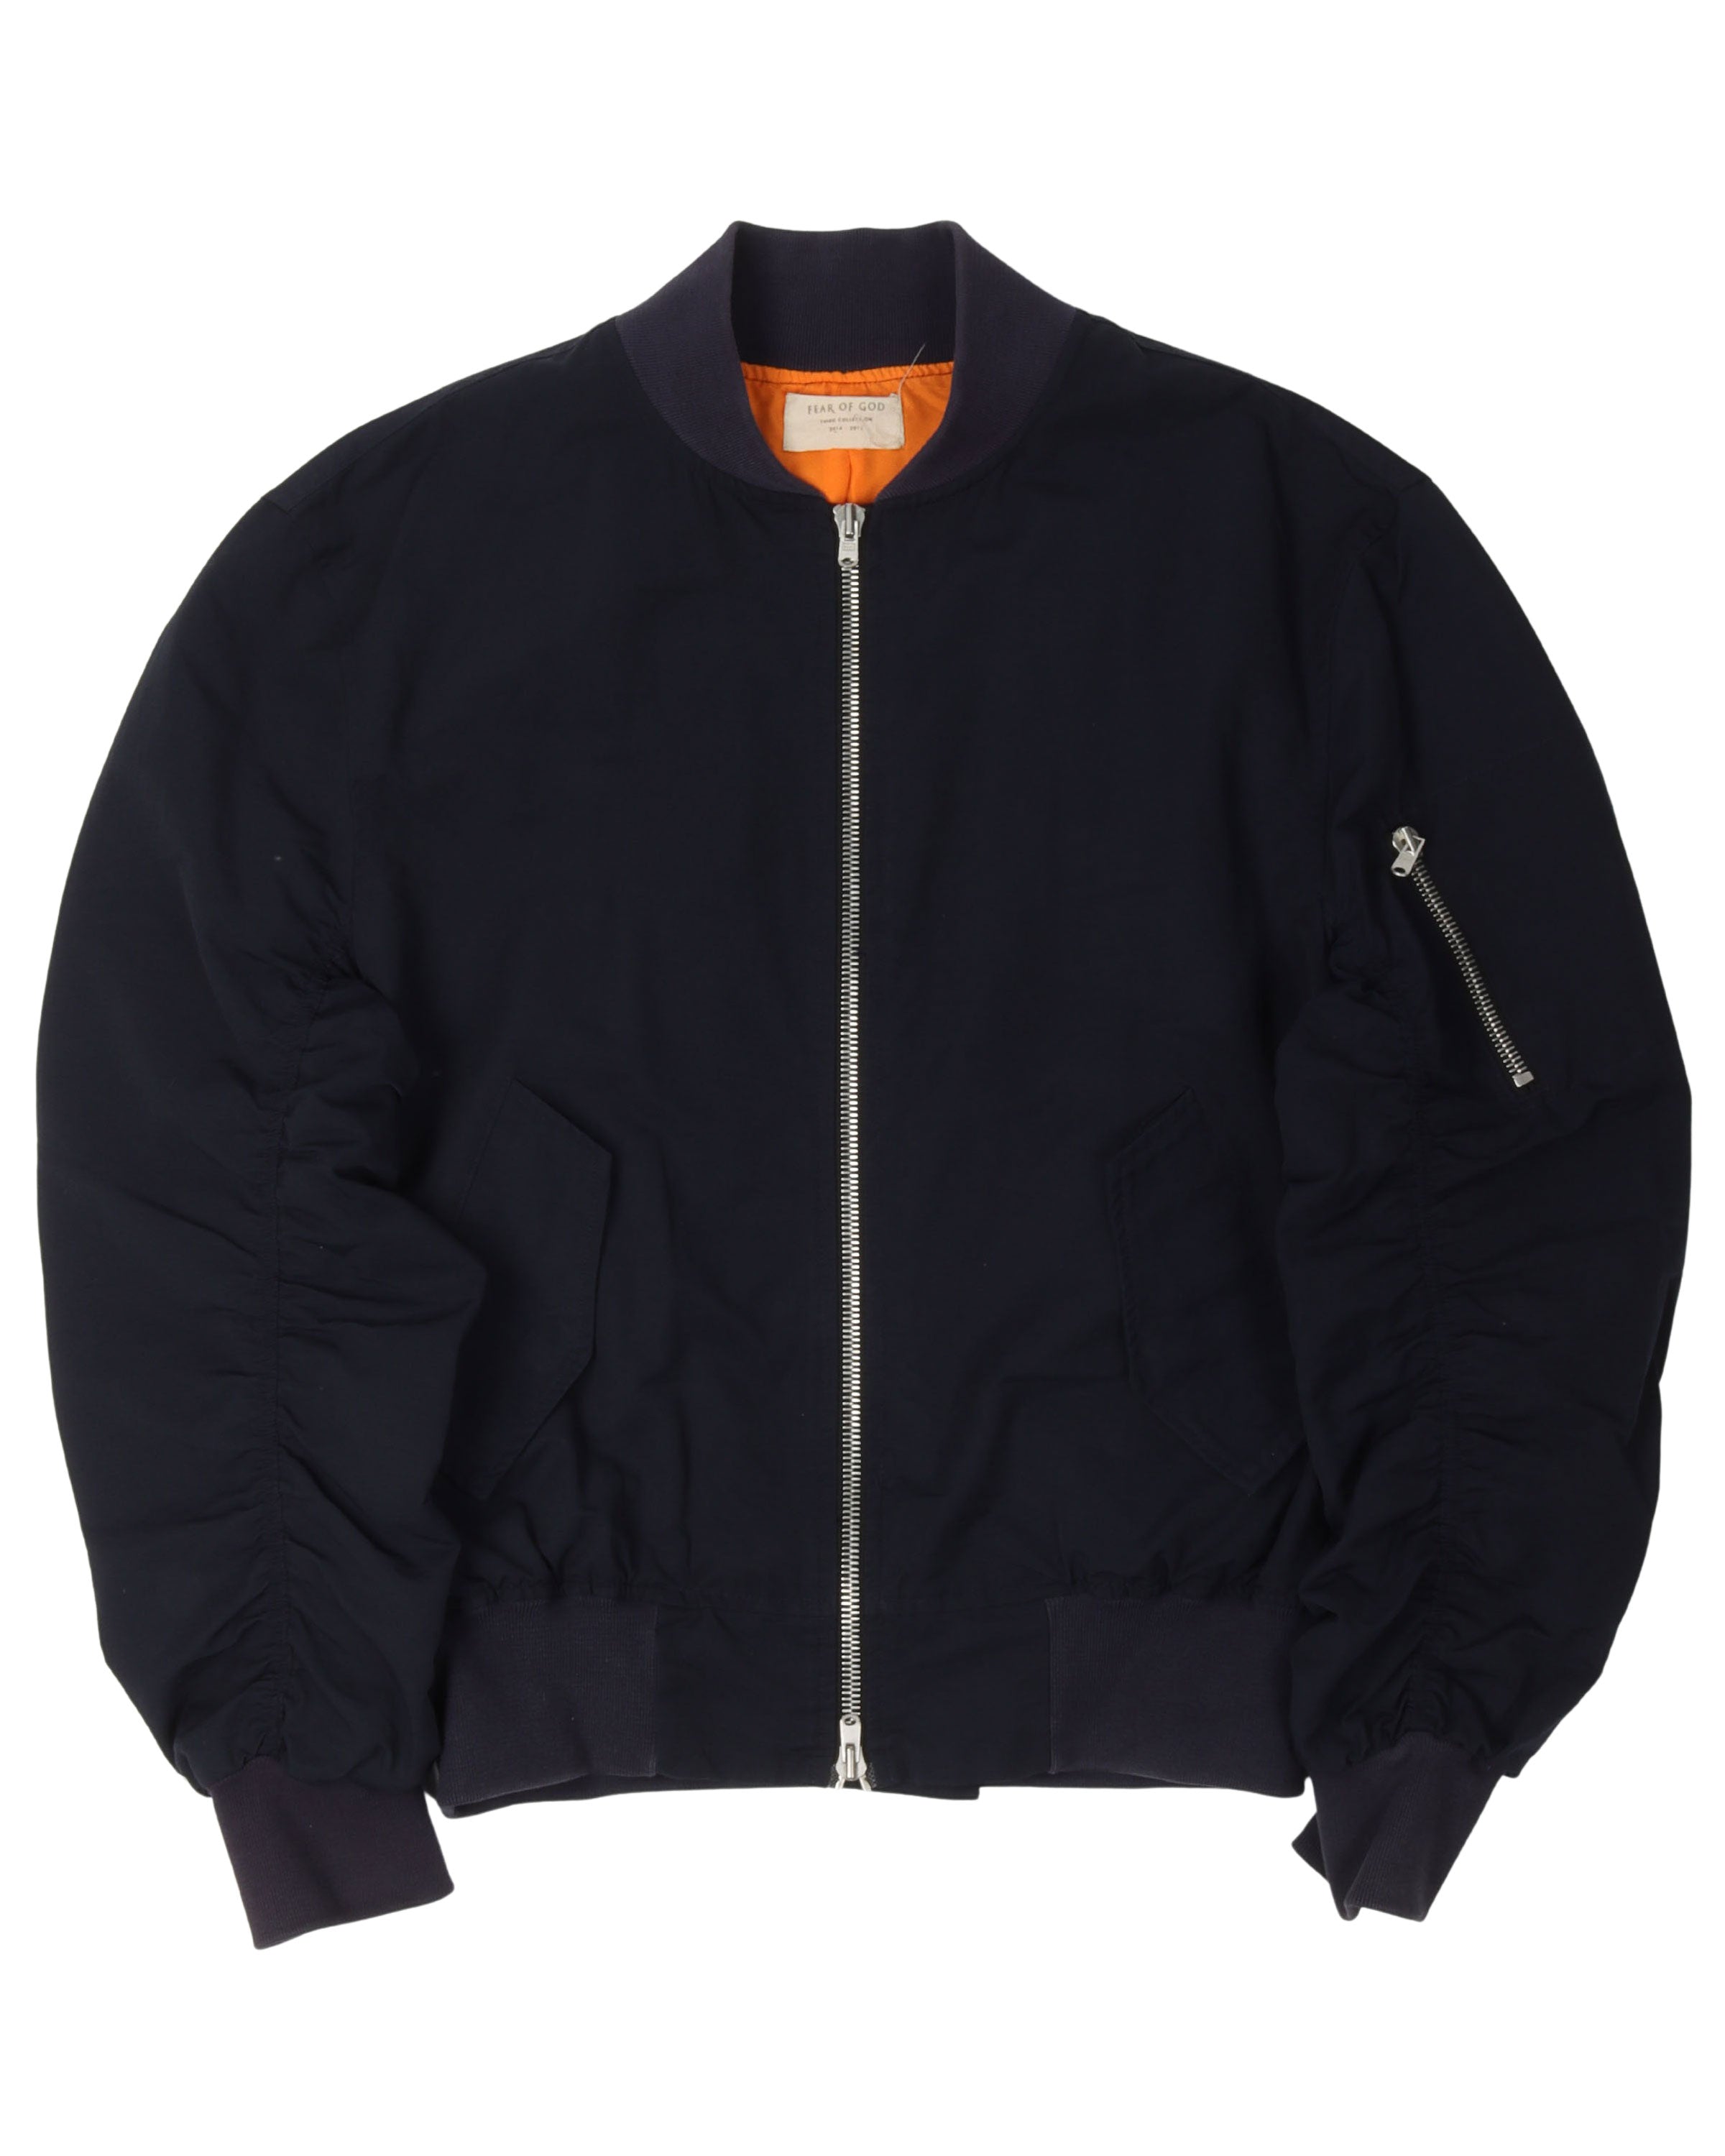 Fear of God Third Collection Bomber Jacket